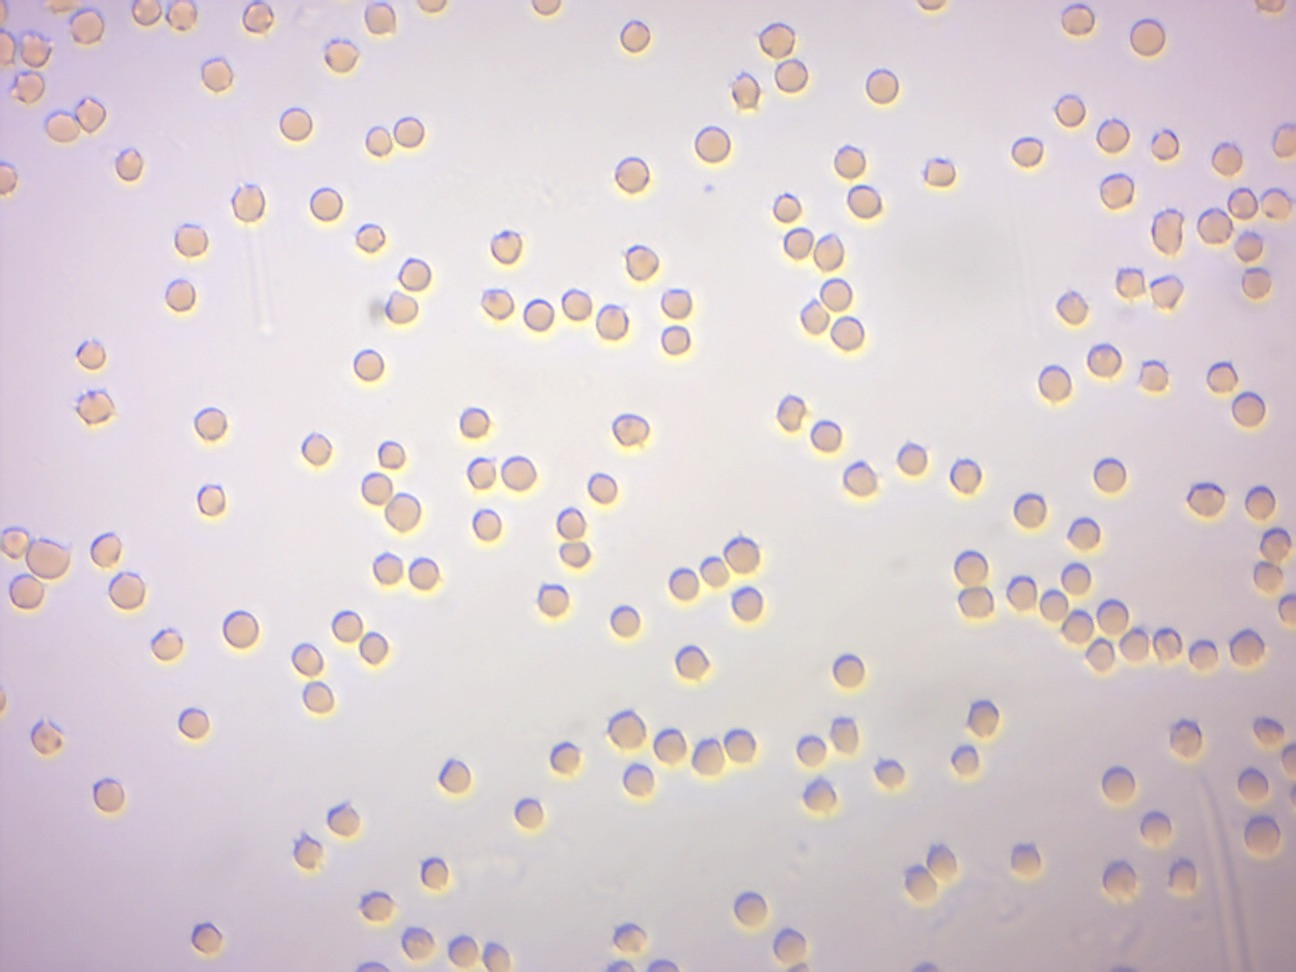 Red blood cells from sheep in isotonic saline solution (0.85% NaCl).